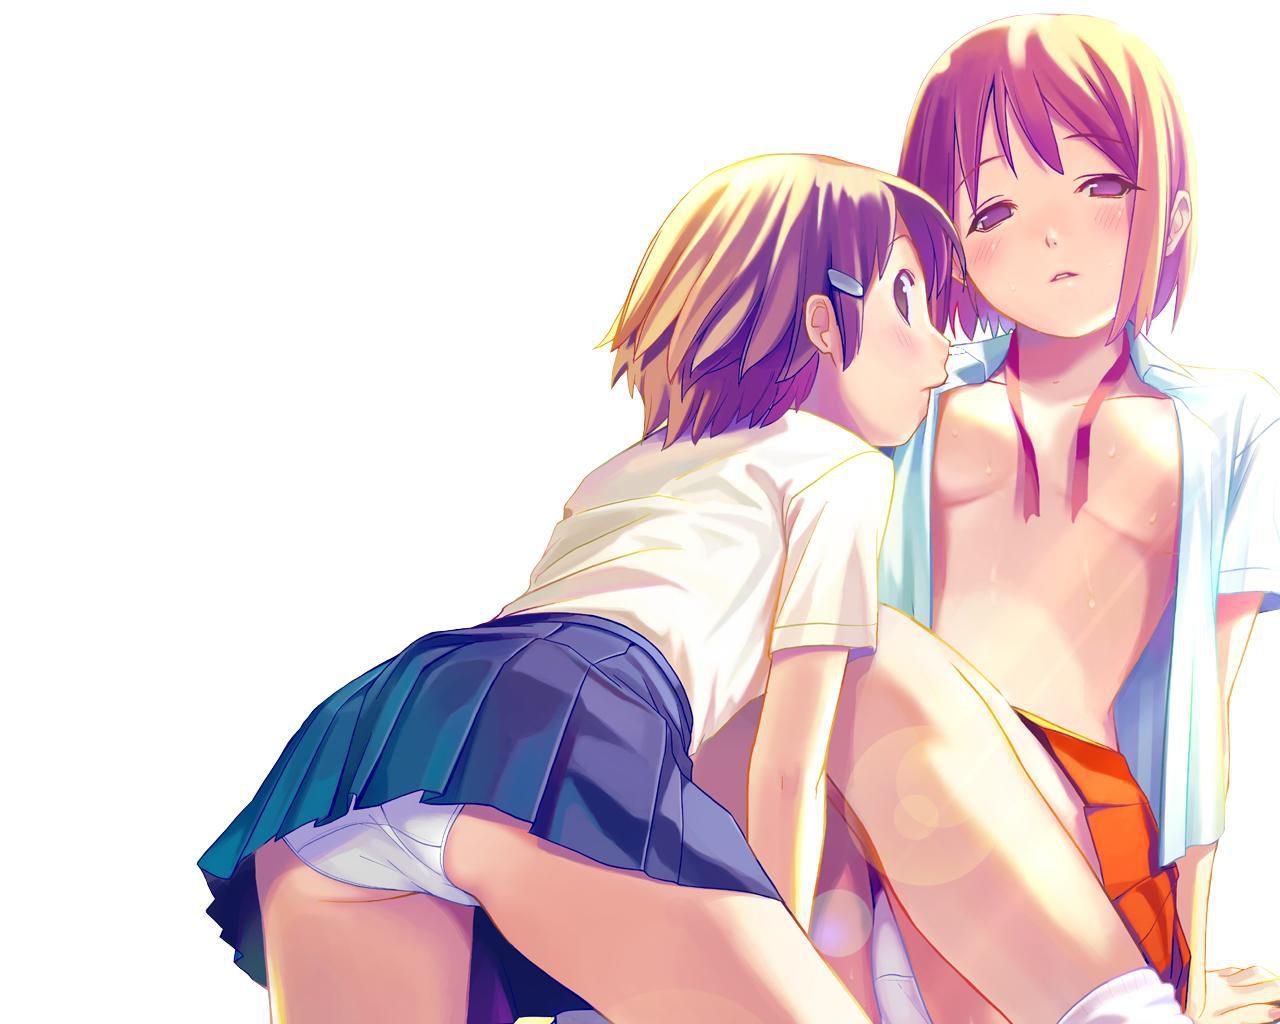 [Yuri/lesbian] secondary erotic image wwww flirting in the girls with each other 3 10